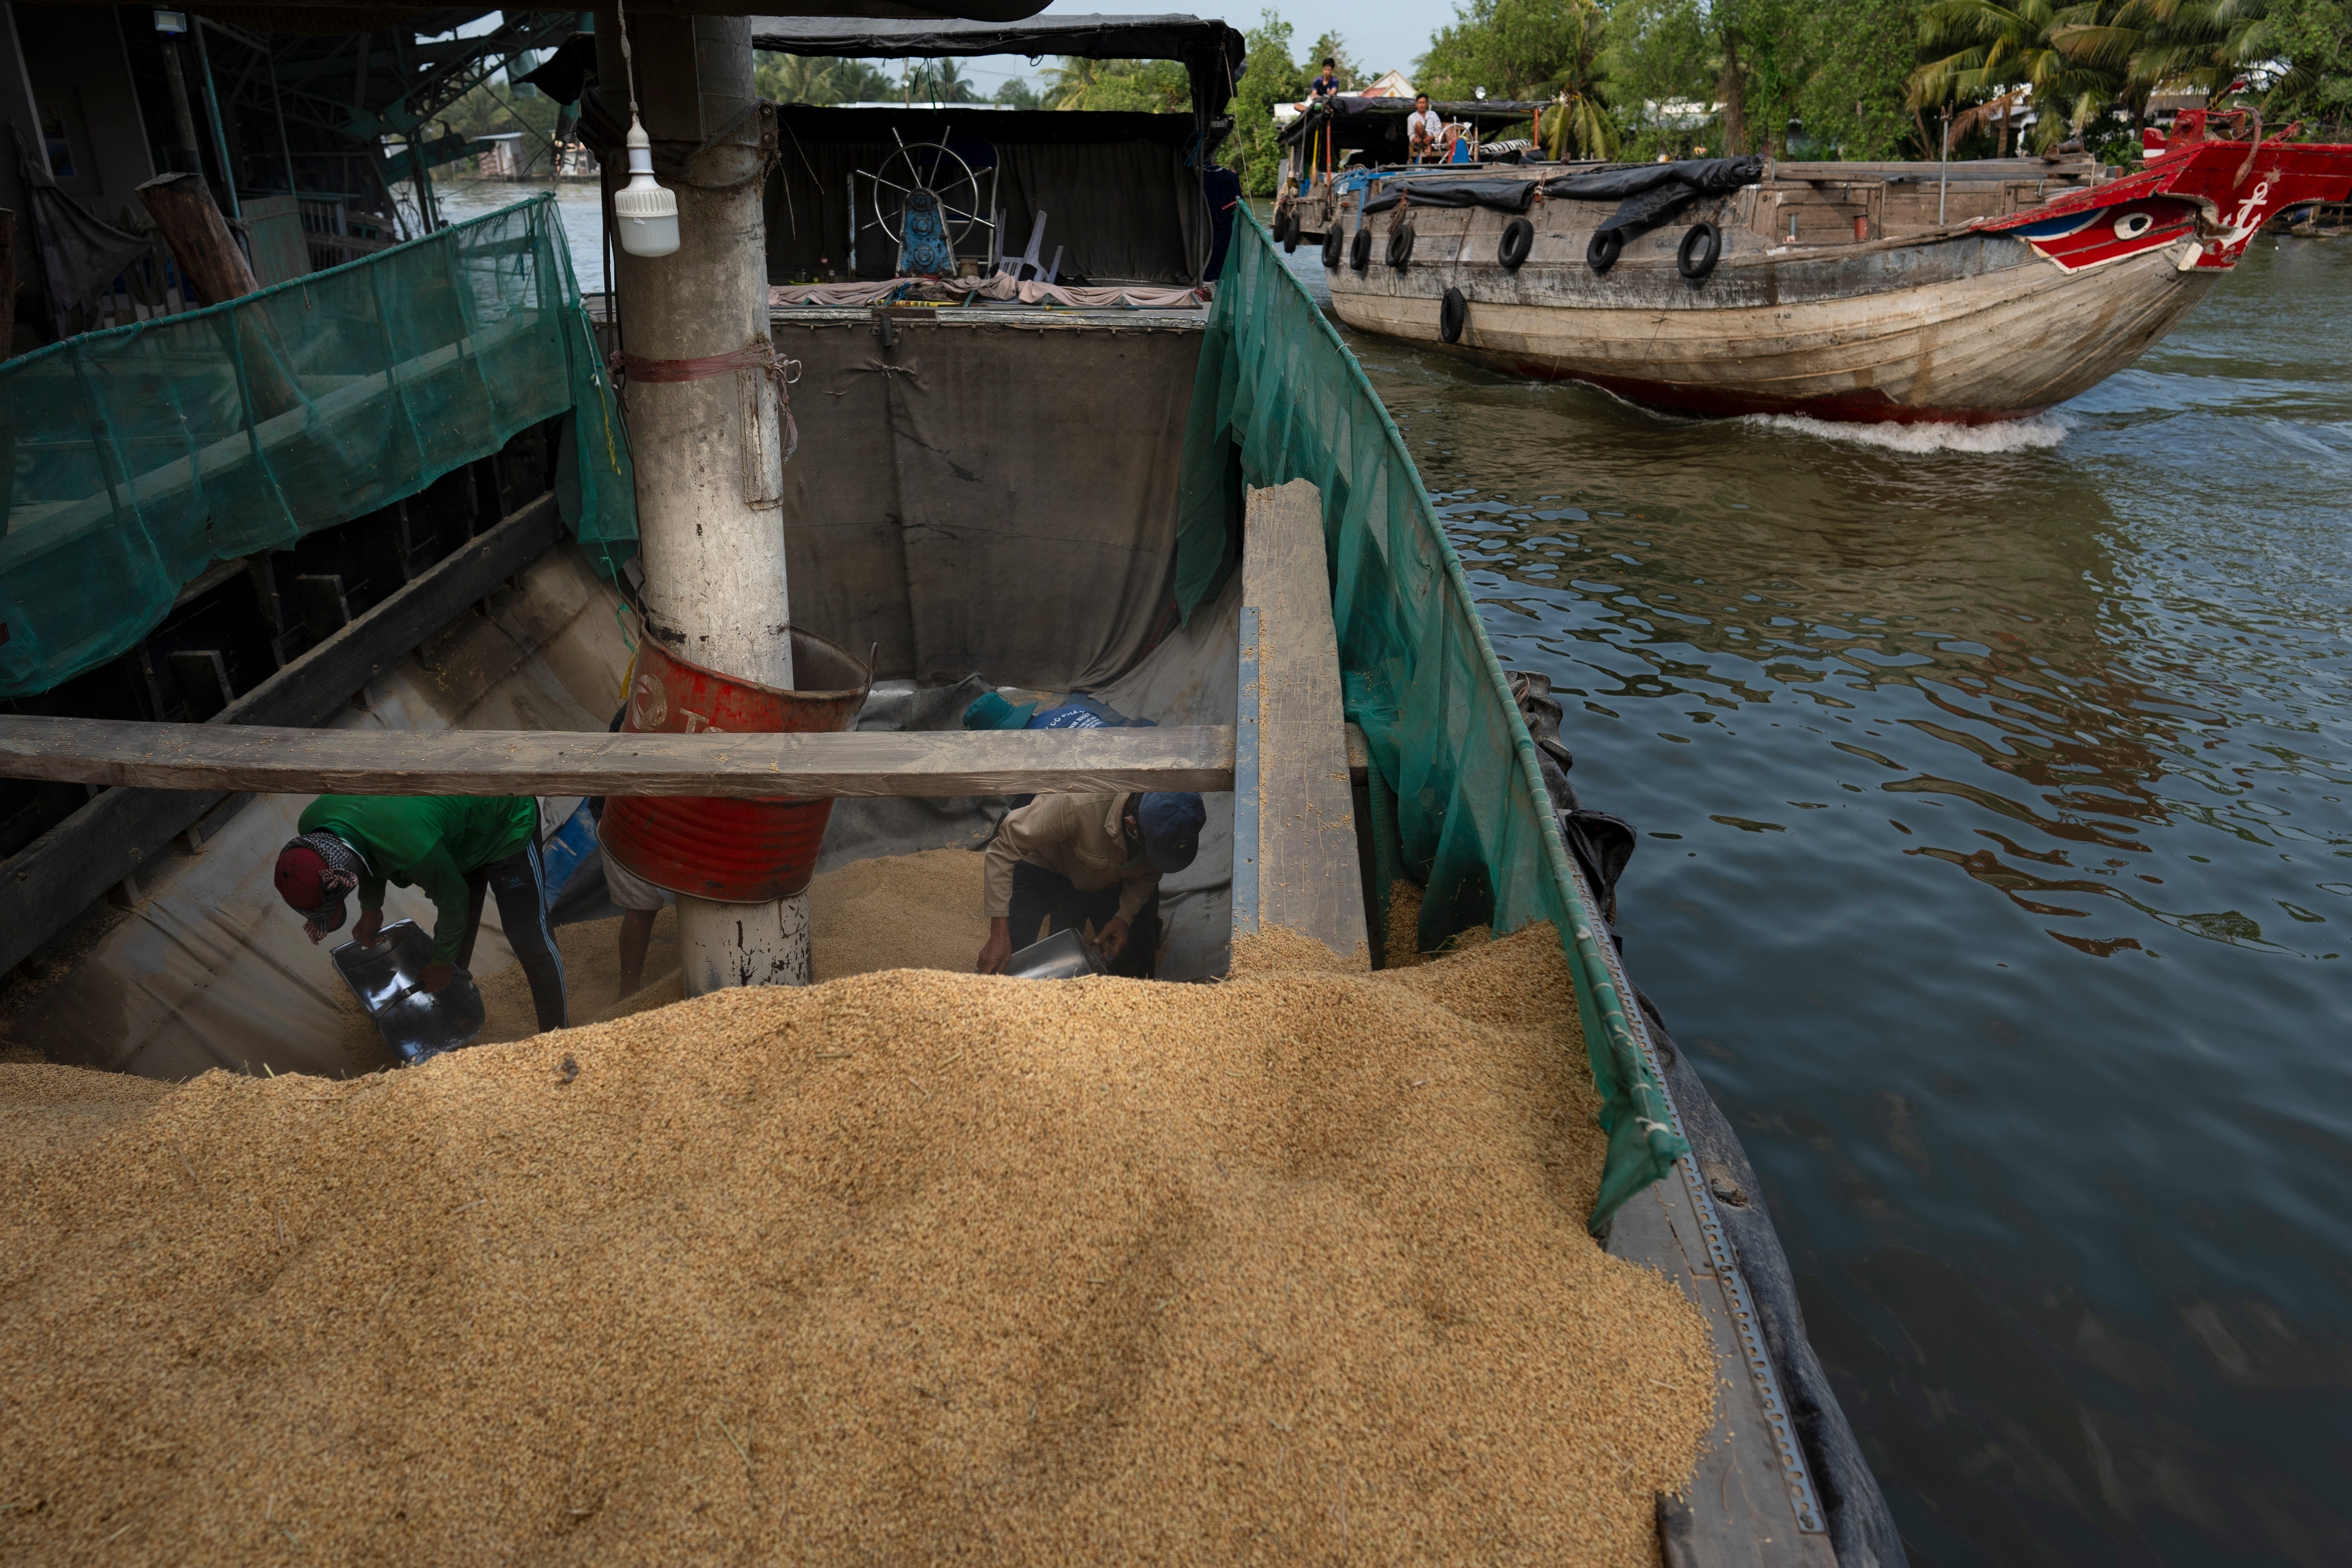 Workers scoop paddy rice into the mouth of a vacuum tube on a boat for processing at Hoang Minh Nhat, a rice export company in Can Tho, Vietnam